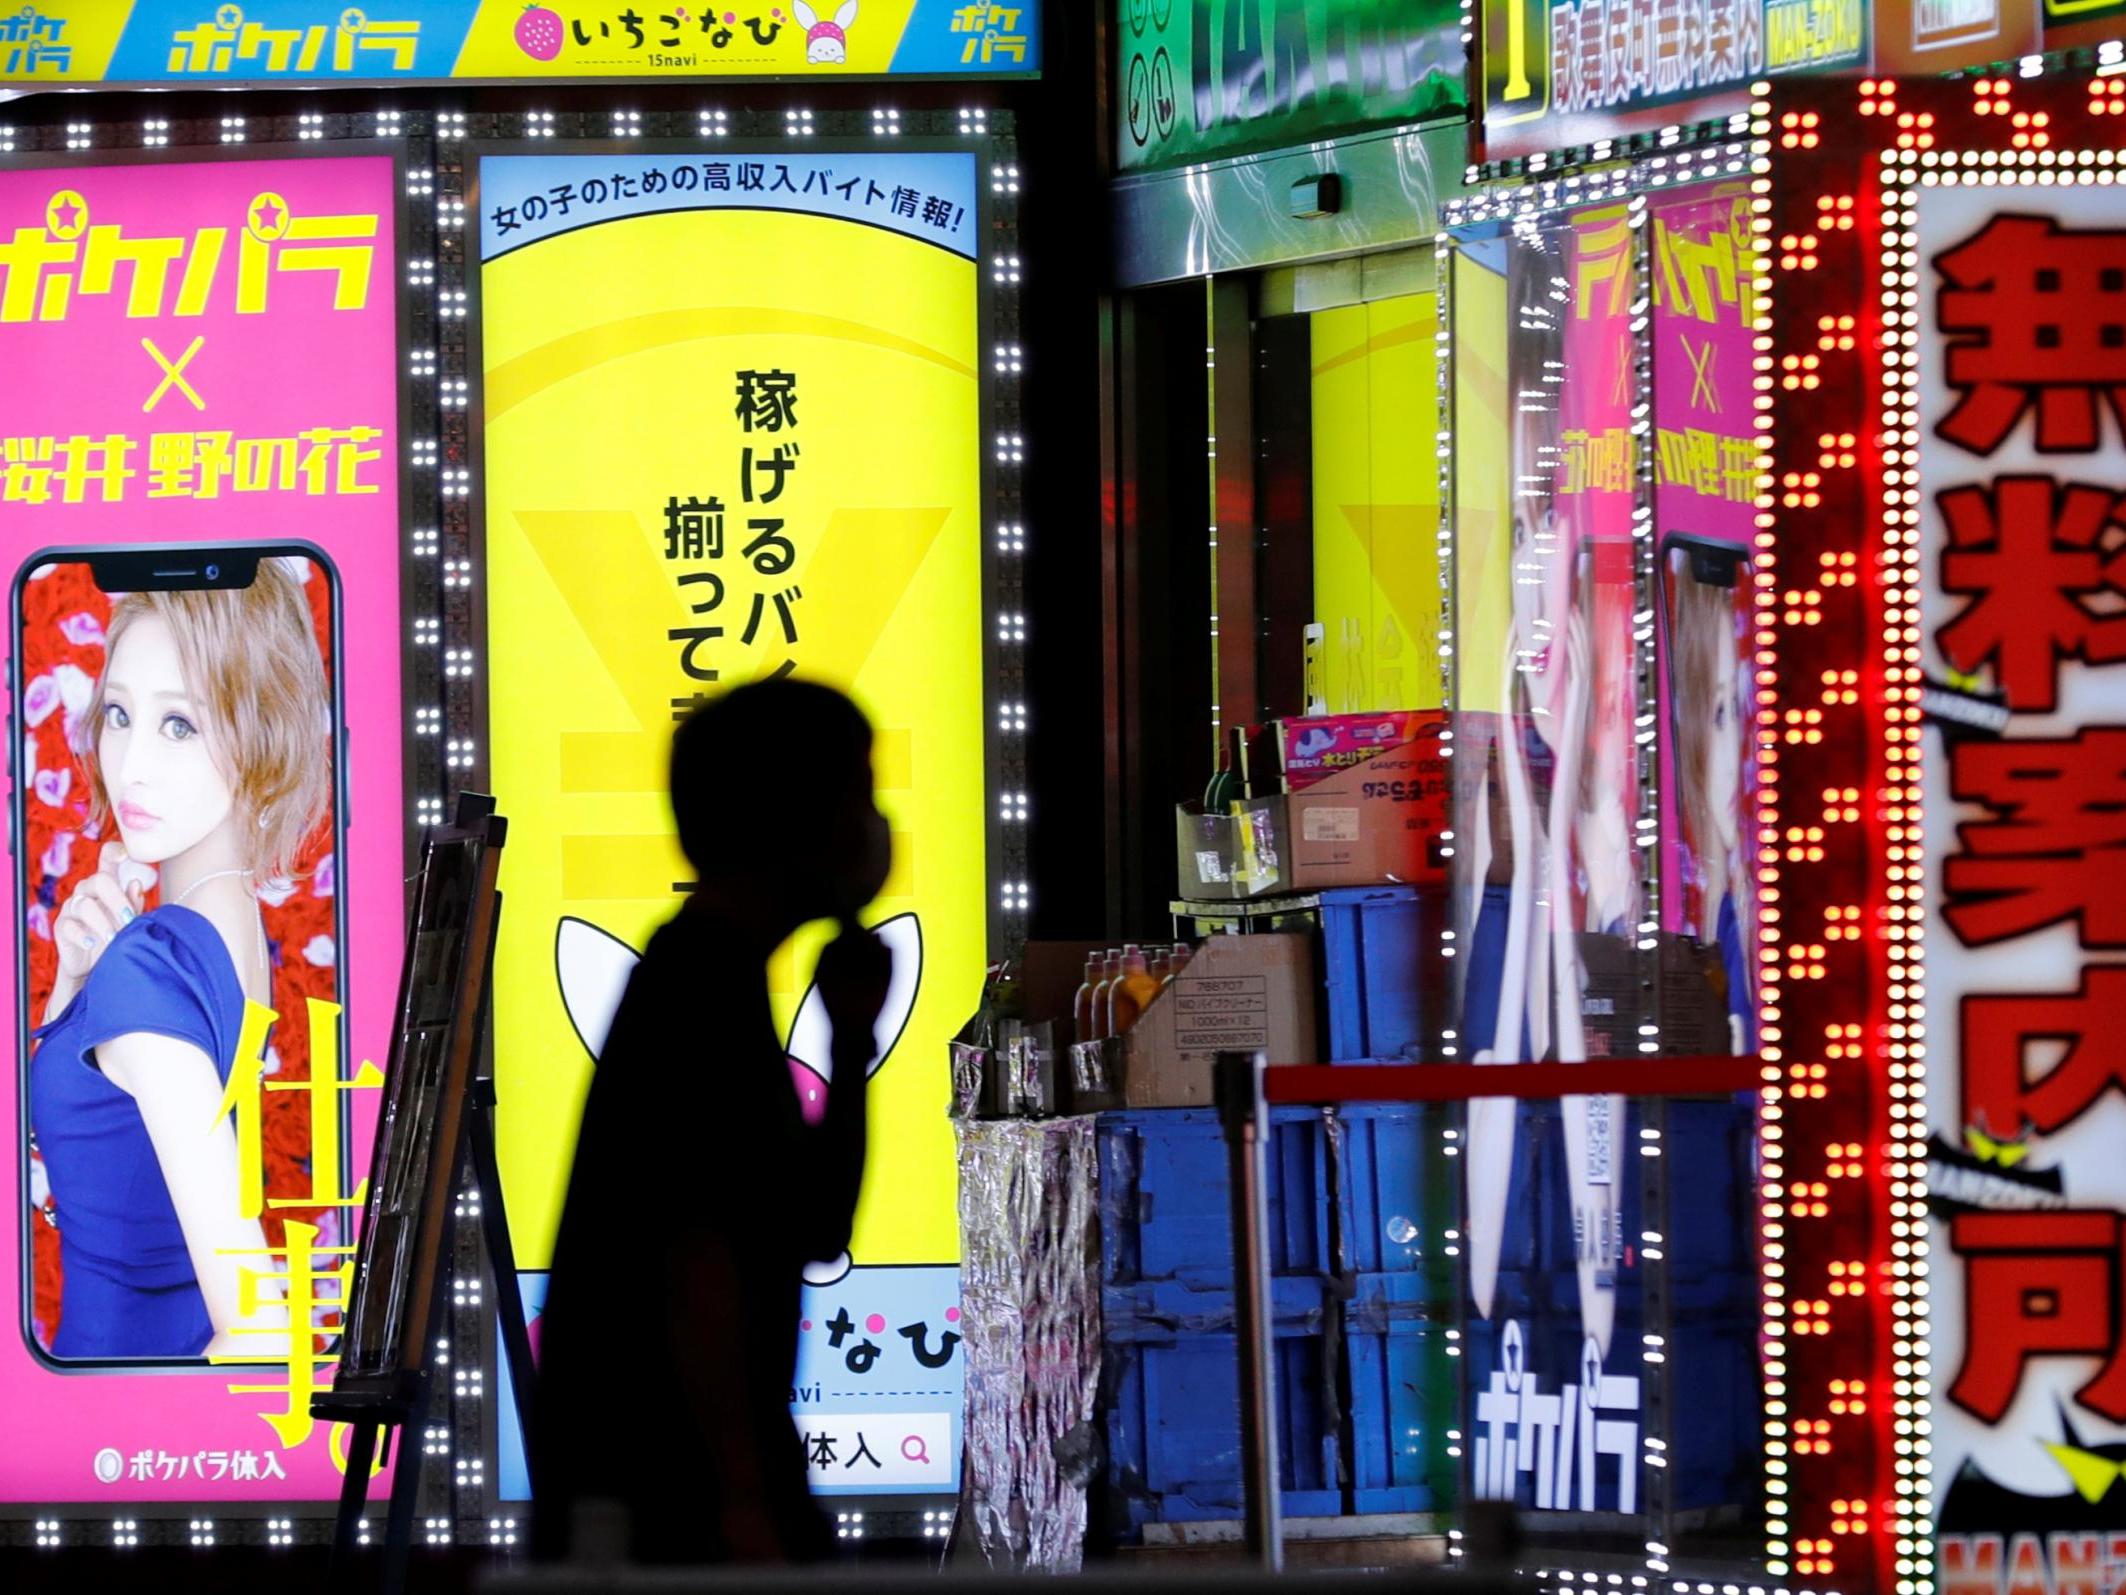 A spike in cases in Tokyo has led officials to try to crack down on the capital's teeming nightlife